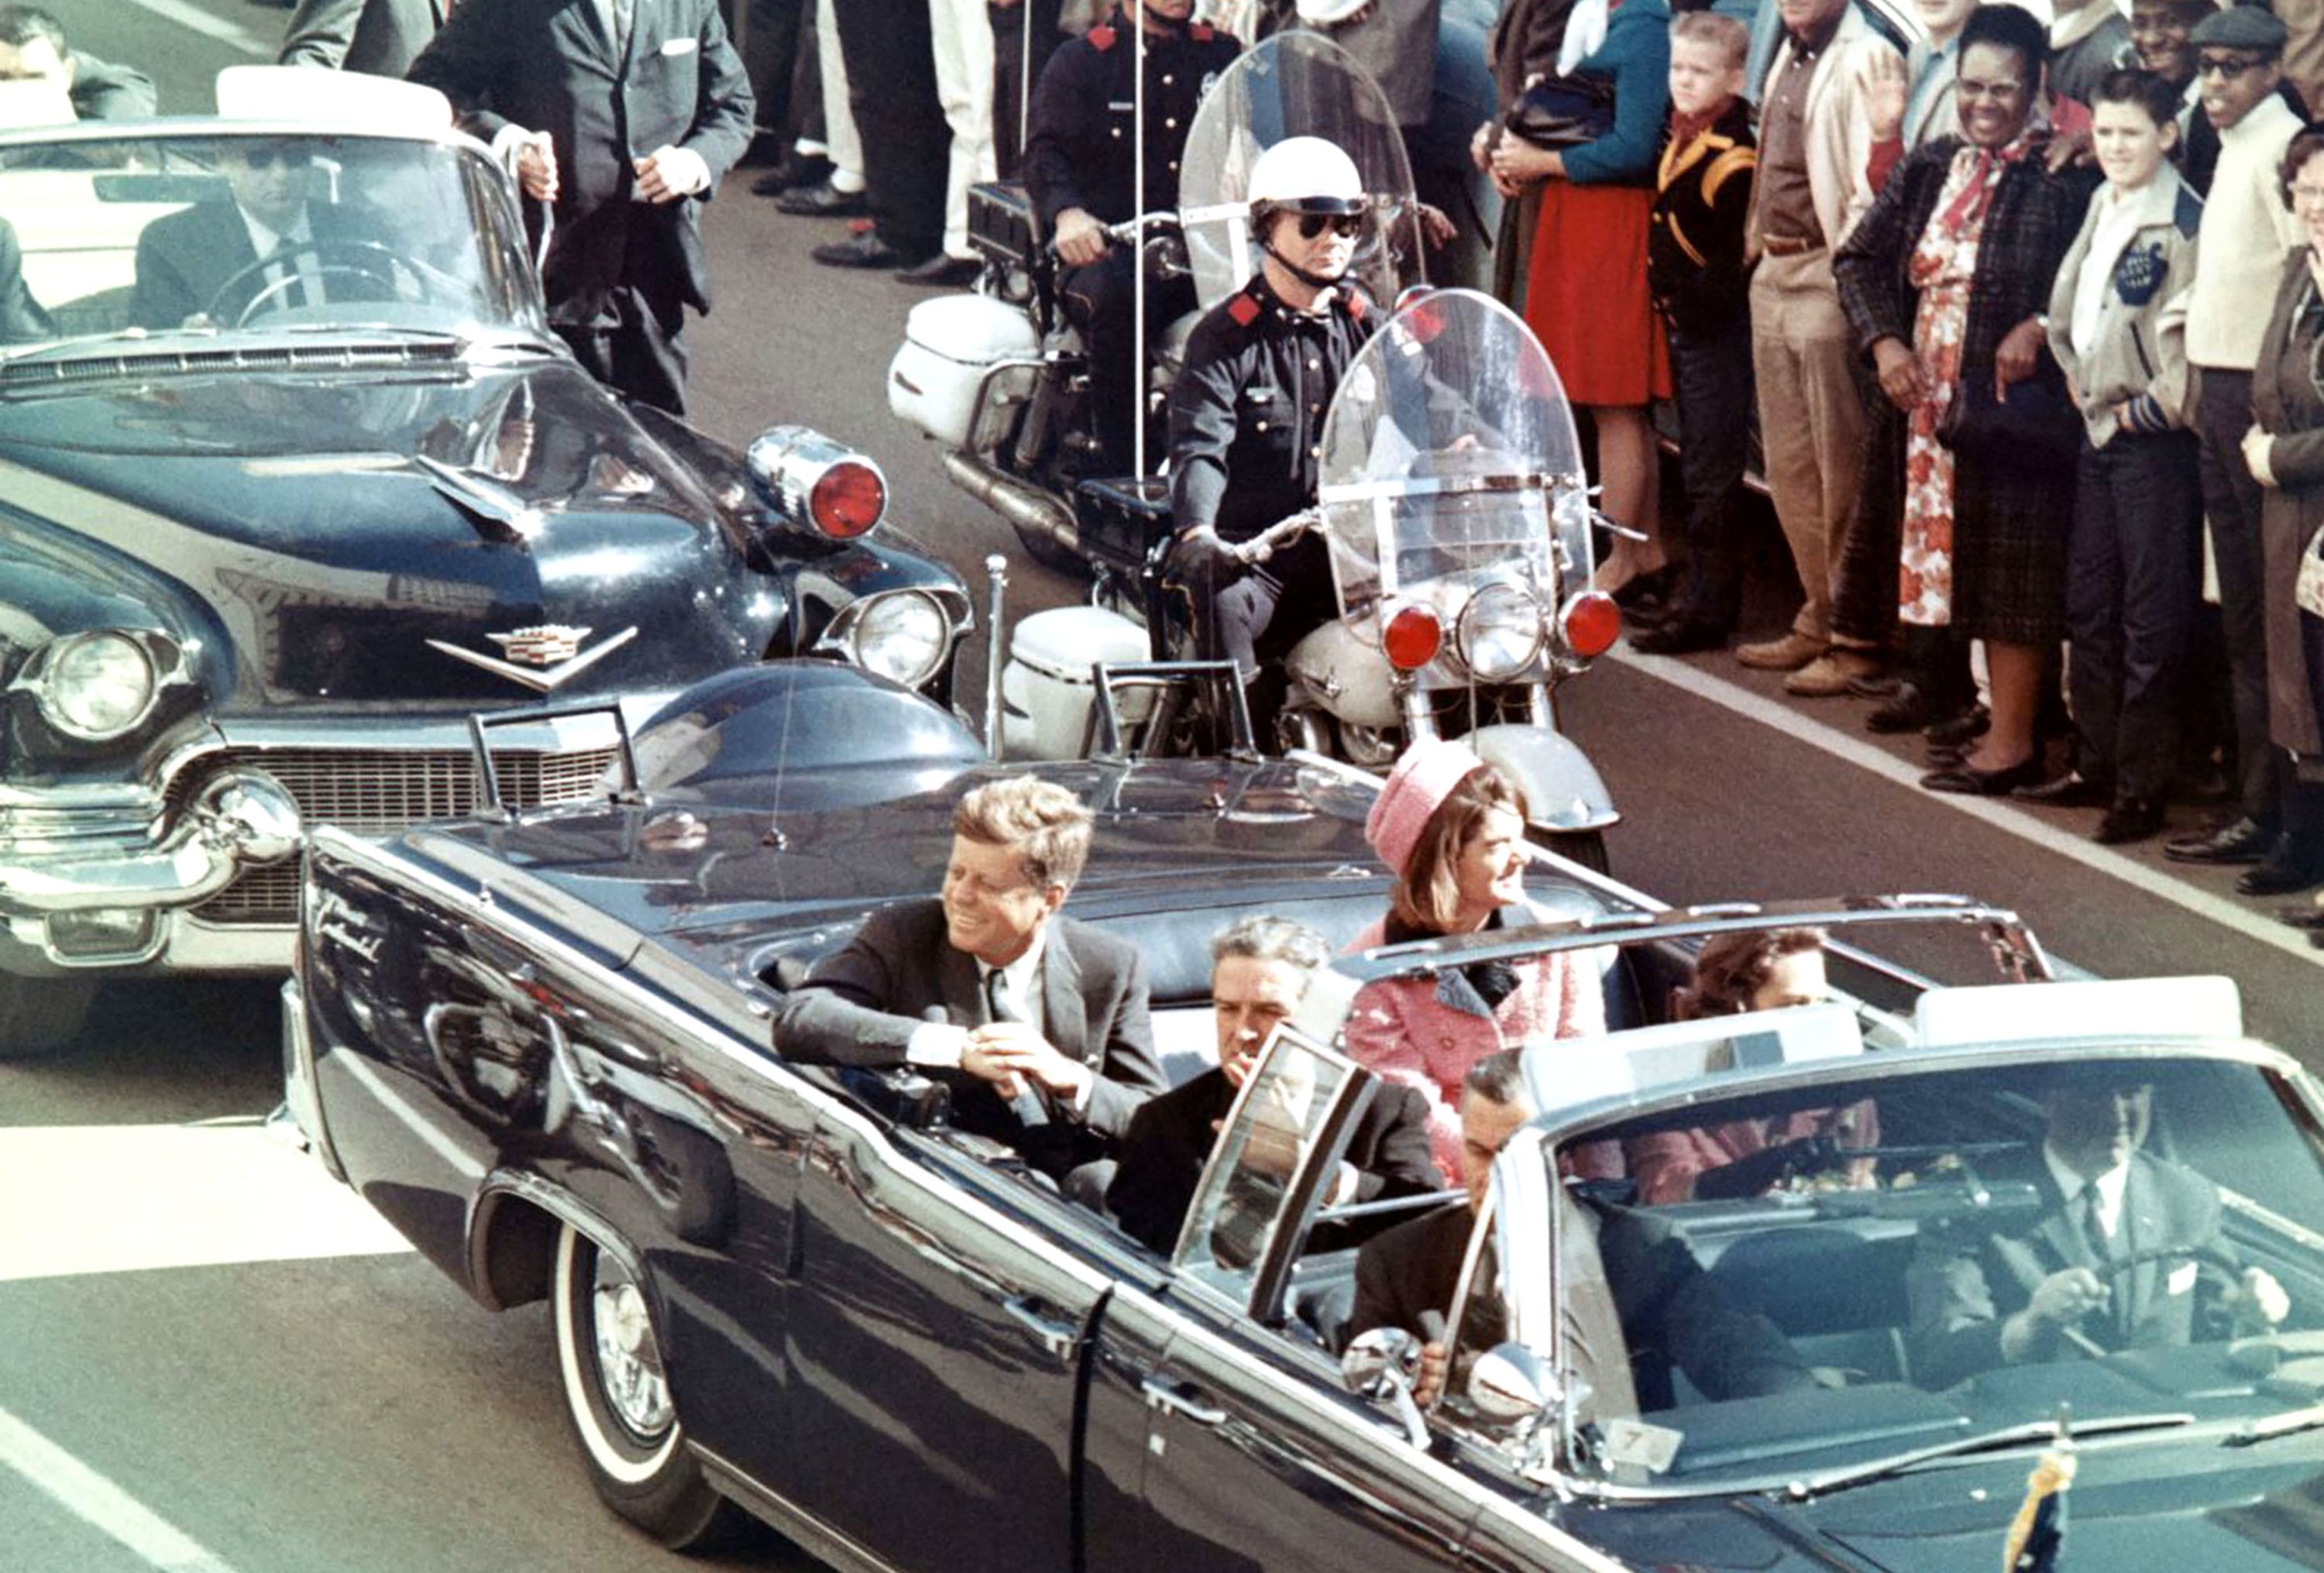 President John F. Kennedy rides in the back seat with his wife, Jacqueline, as his motorcade drives toward Dealey Plaza in Dallas on November 22, 1963.